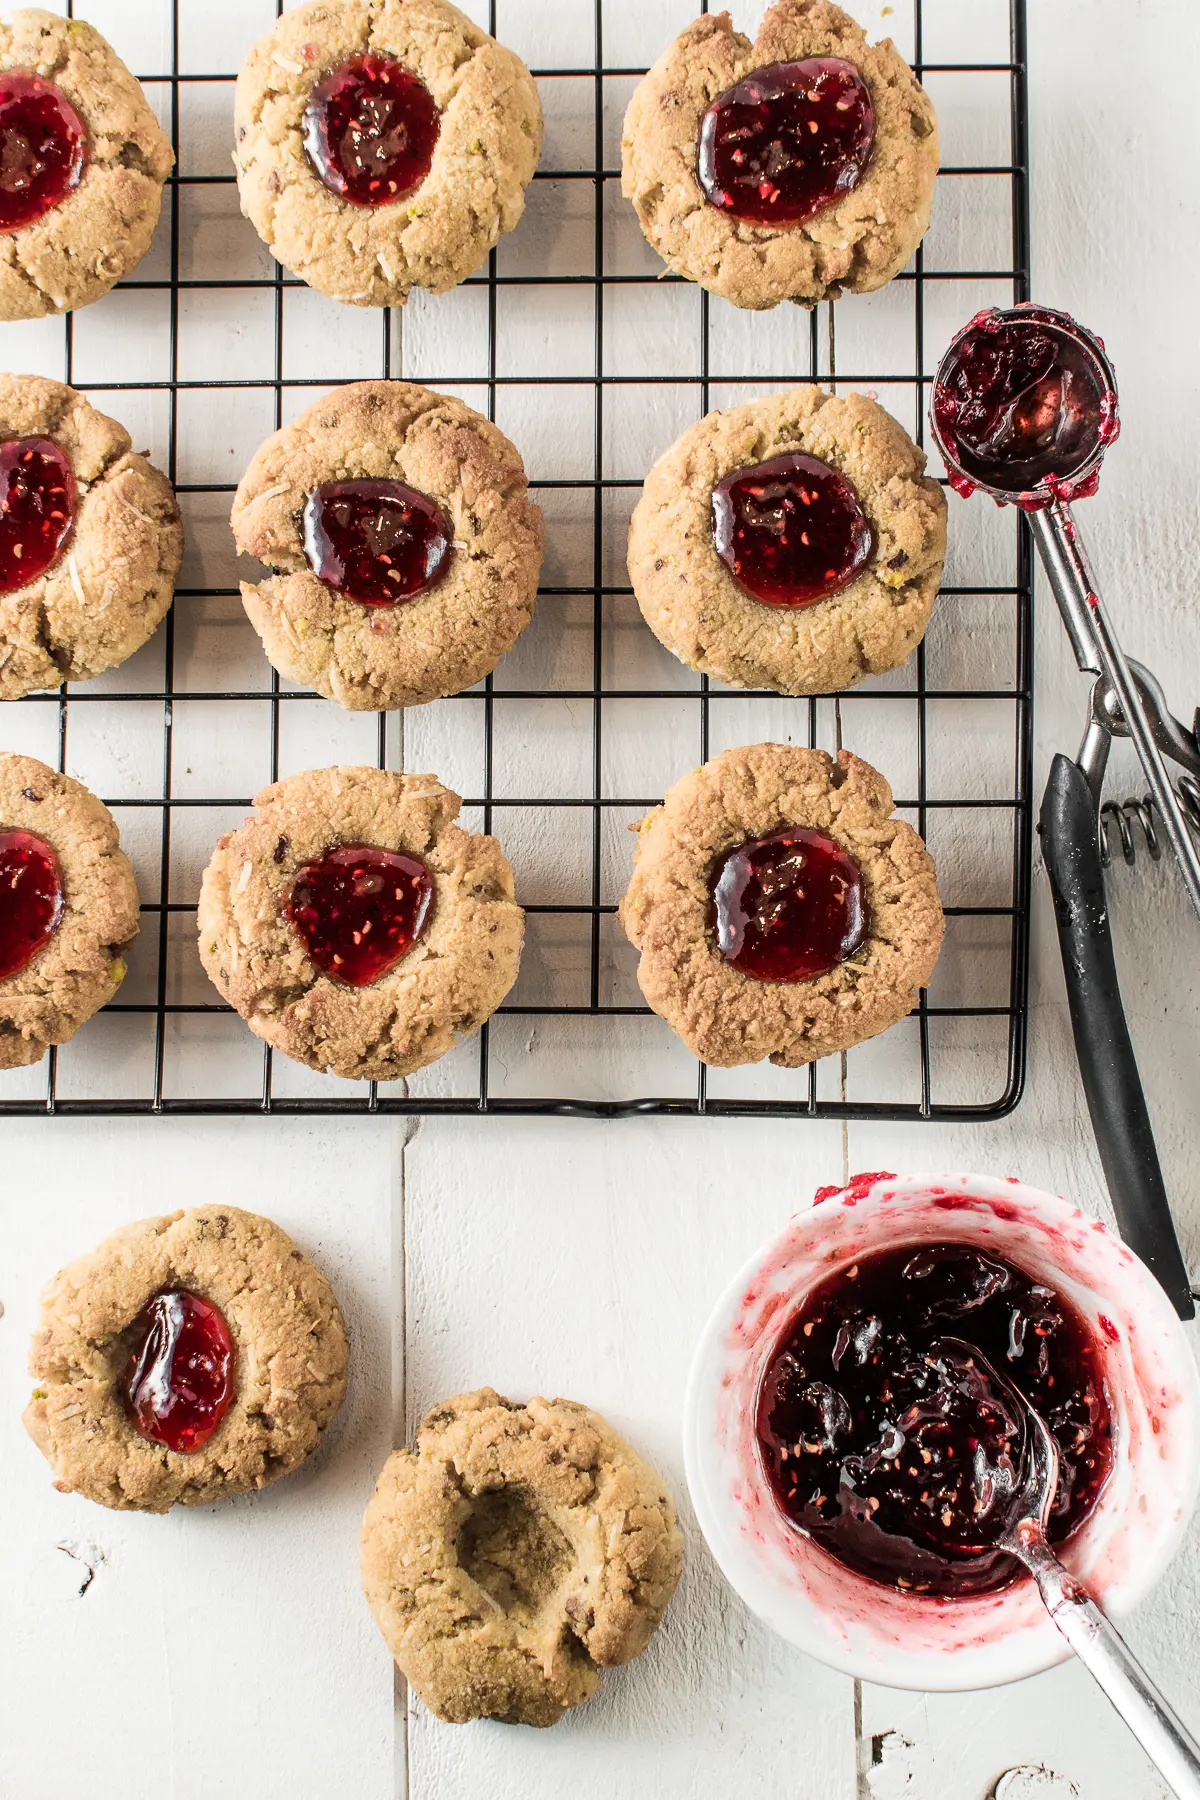 Set on a white backdrop, are nine thumbprint cookies filled with gooey, raspberry jam spaced evenly on a cooling rack. A stainless cookie scoop, half full of sticky jam, rests on the right side of the metal rack.  Below the rack, are two cookies--one filled with jam, and one with an empty divot. Beside the empty cookie is a jam-filled teaspoon inside a small, white bowl filled with sticky, raspberry jam.